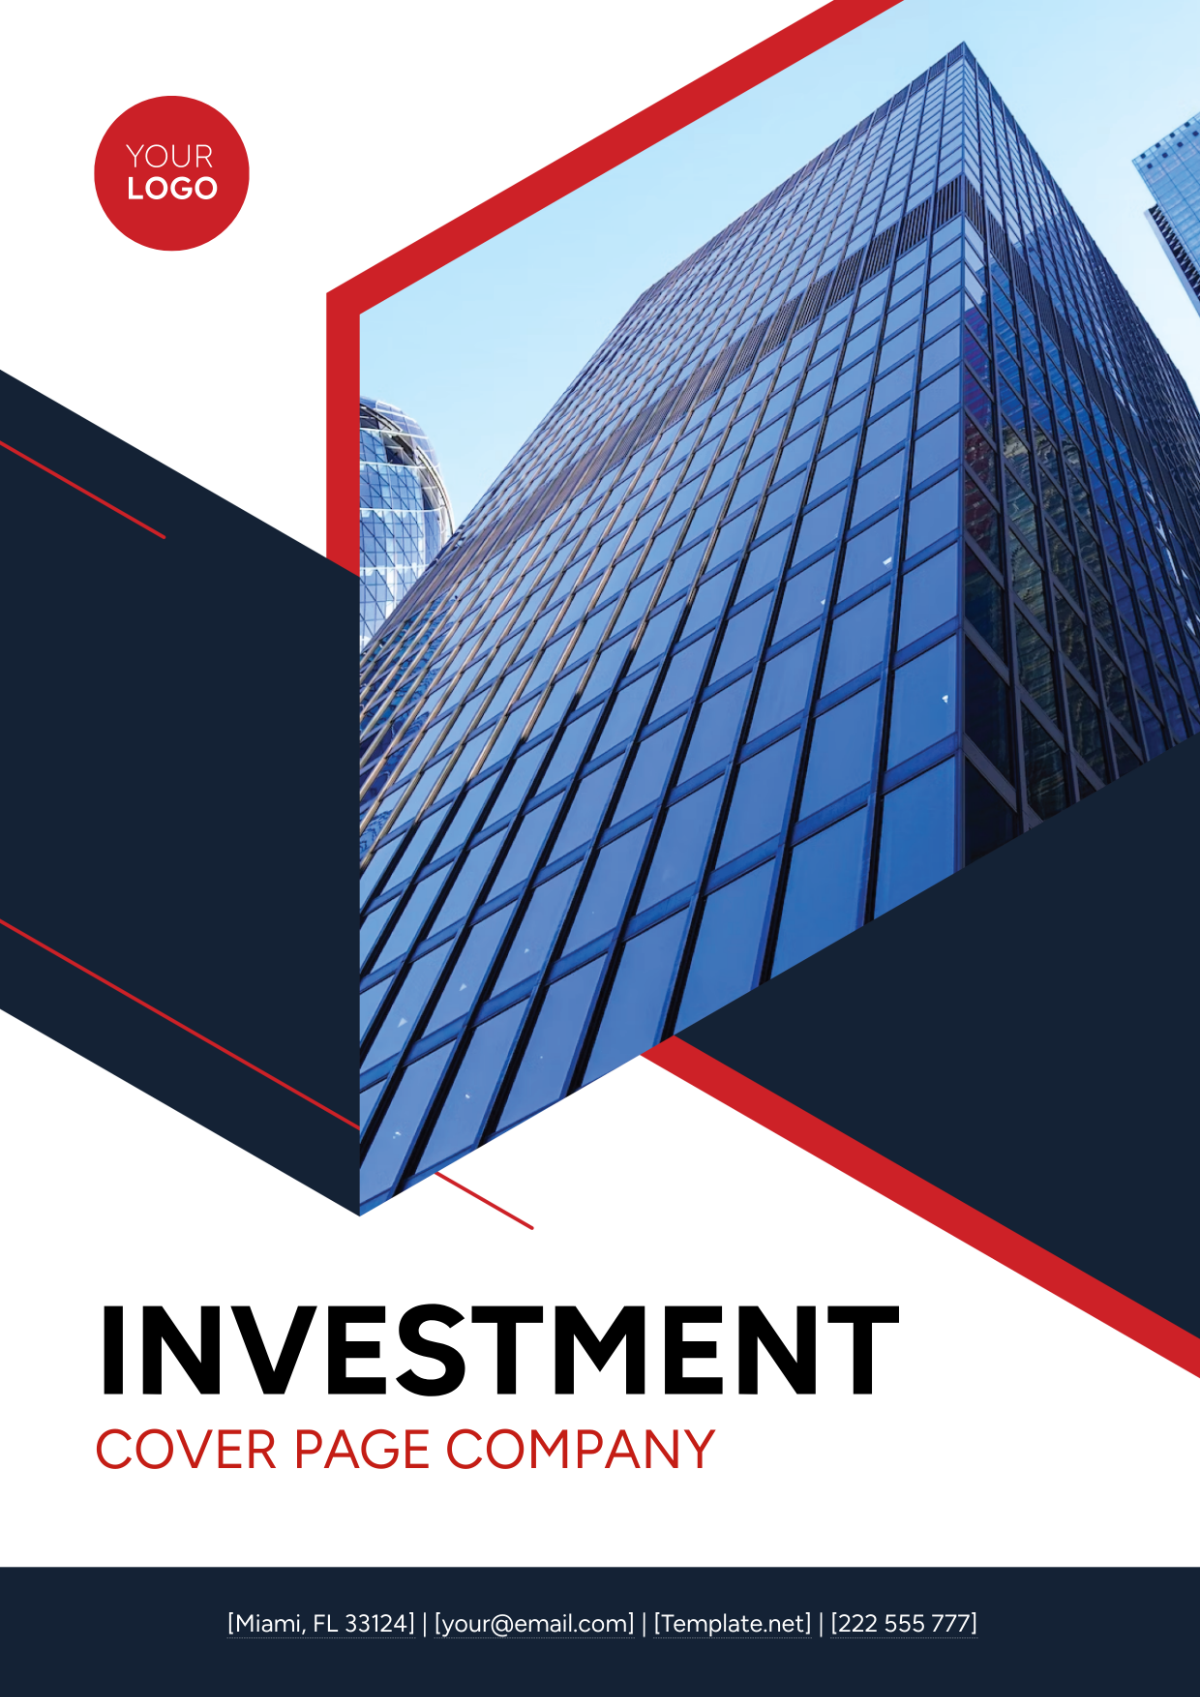 Investment Cover Page Company Template